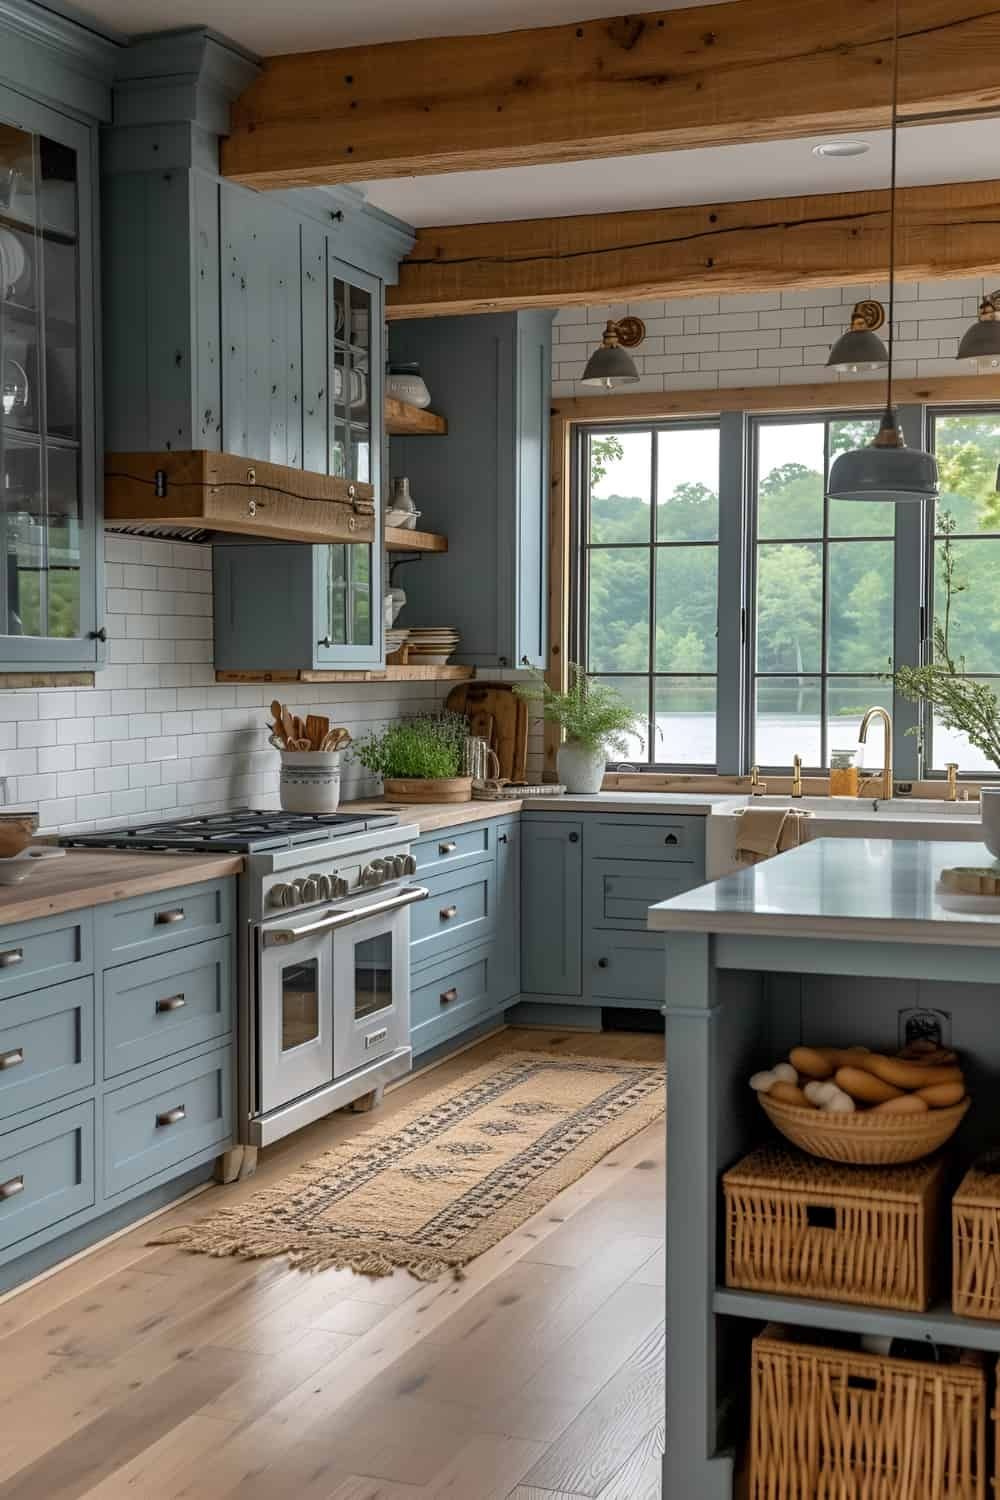 Feeling Blue: Why Blue Kitchen Cabinets
are the Hottest Trend in Home Design